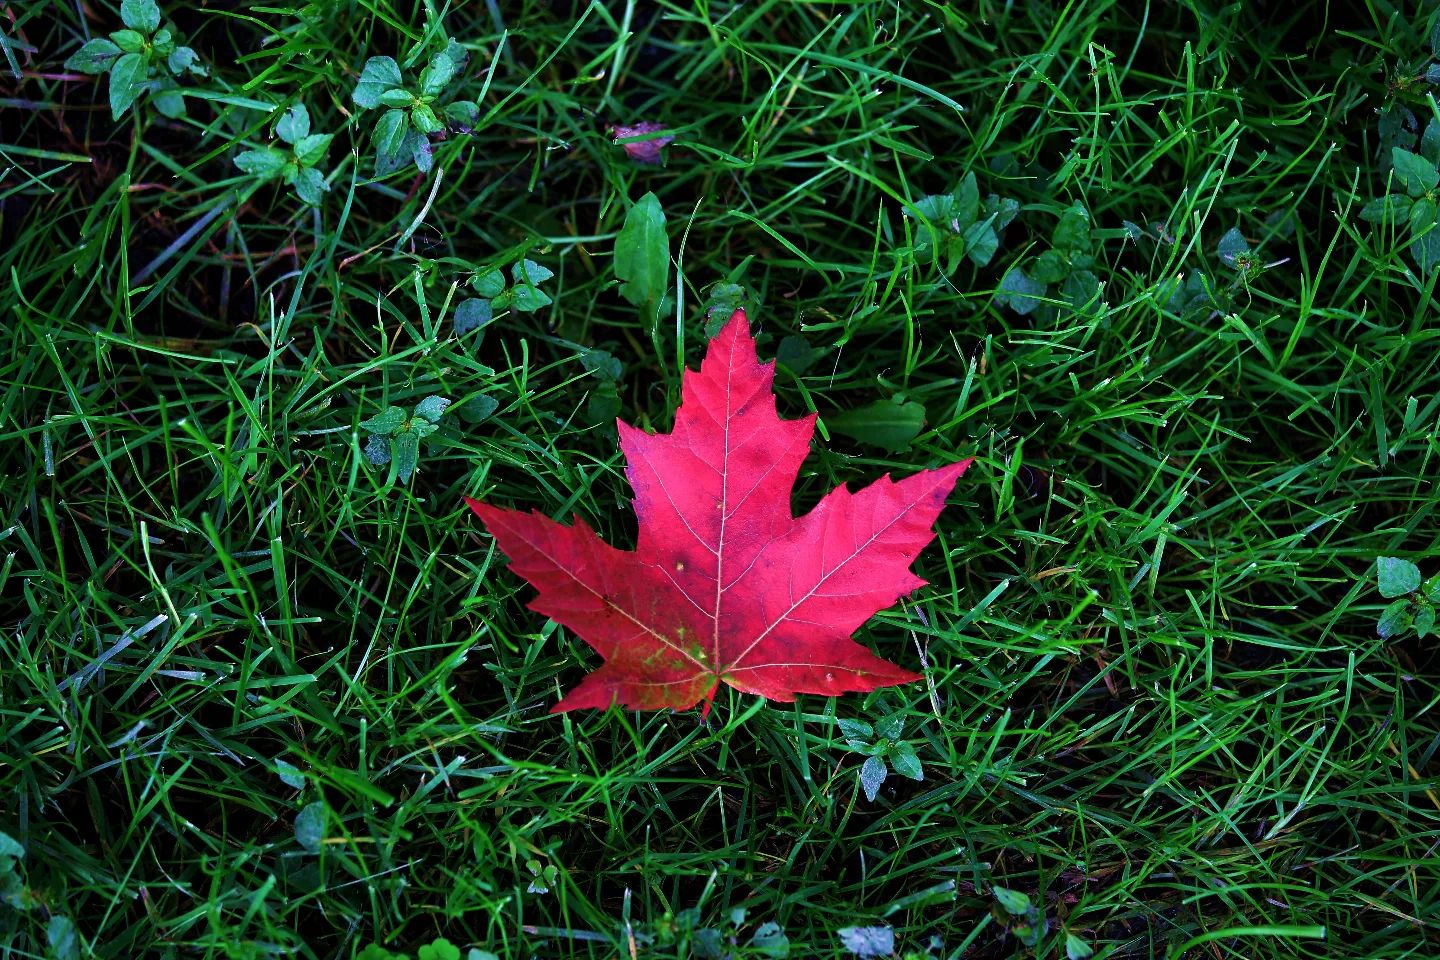 I took this at the beginning of fall #photography #photo #picture #leaf #red #redleaf